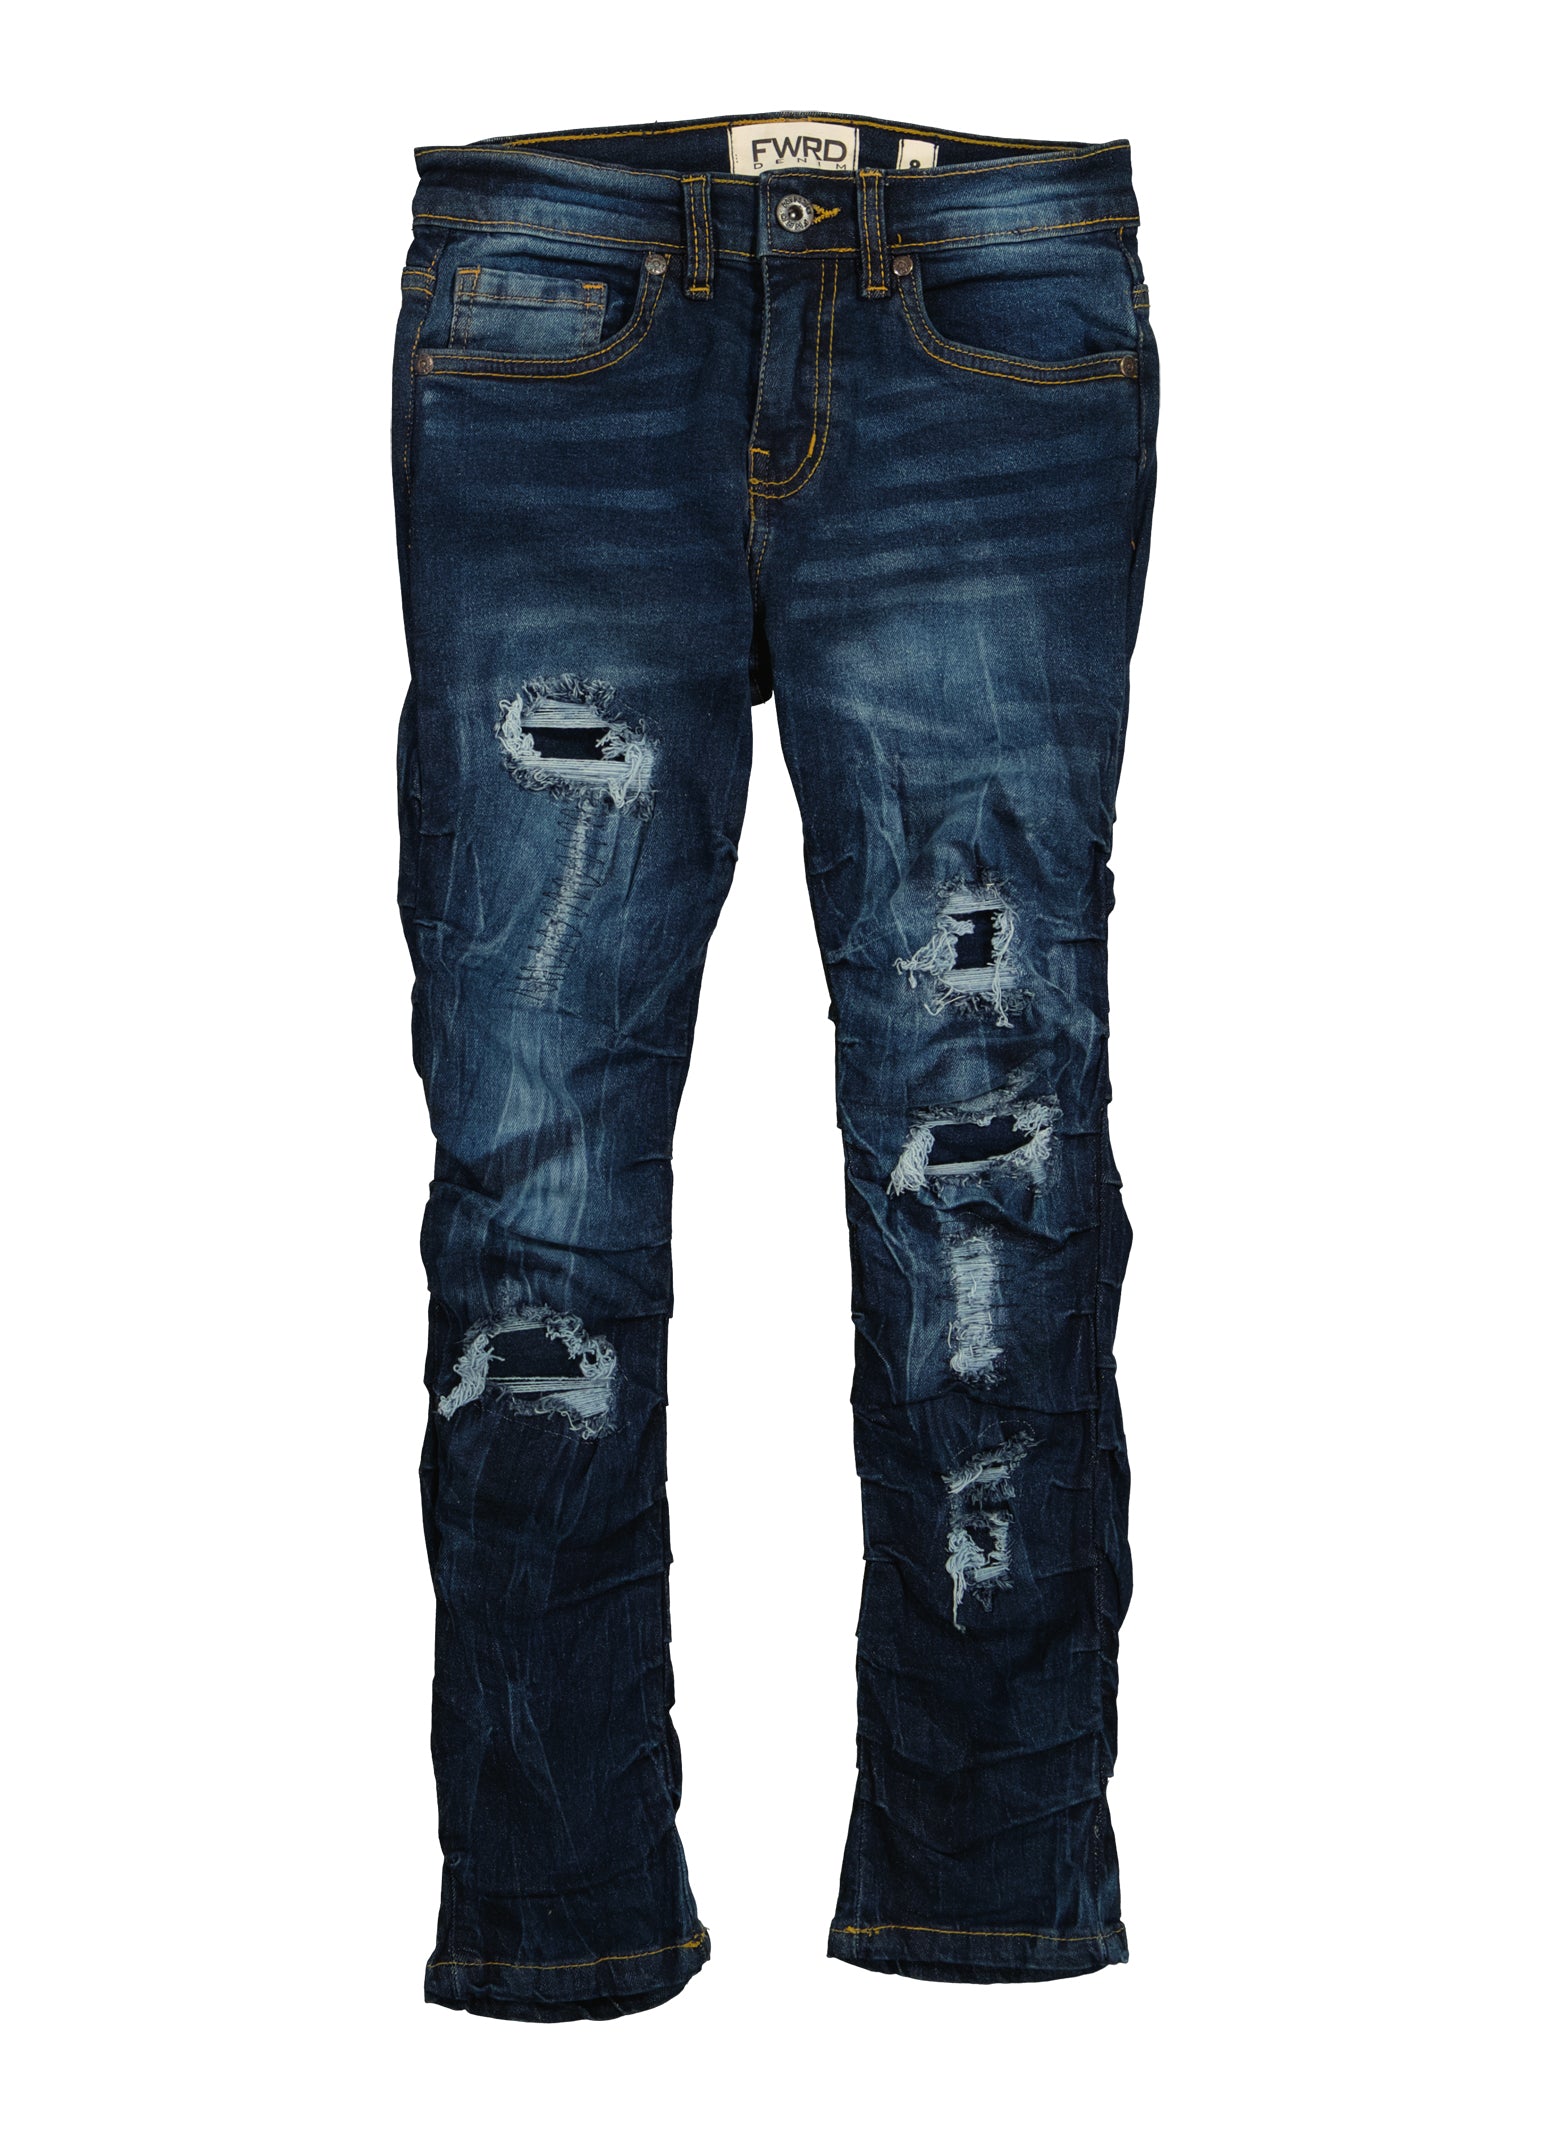 Boys Distressed Whiskered Stacked Jeans